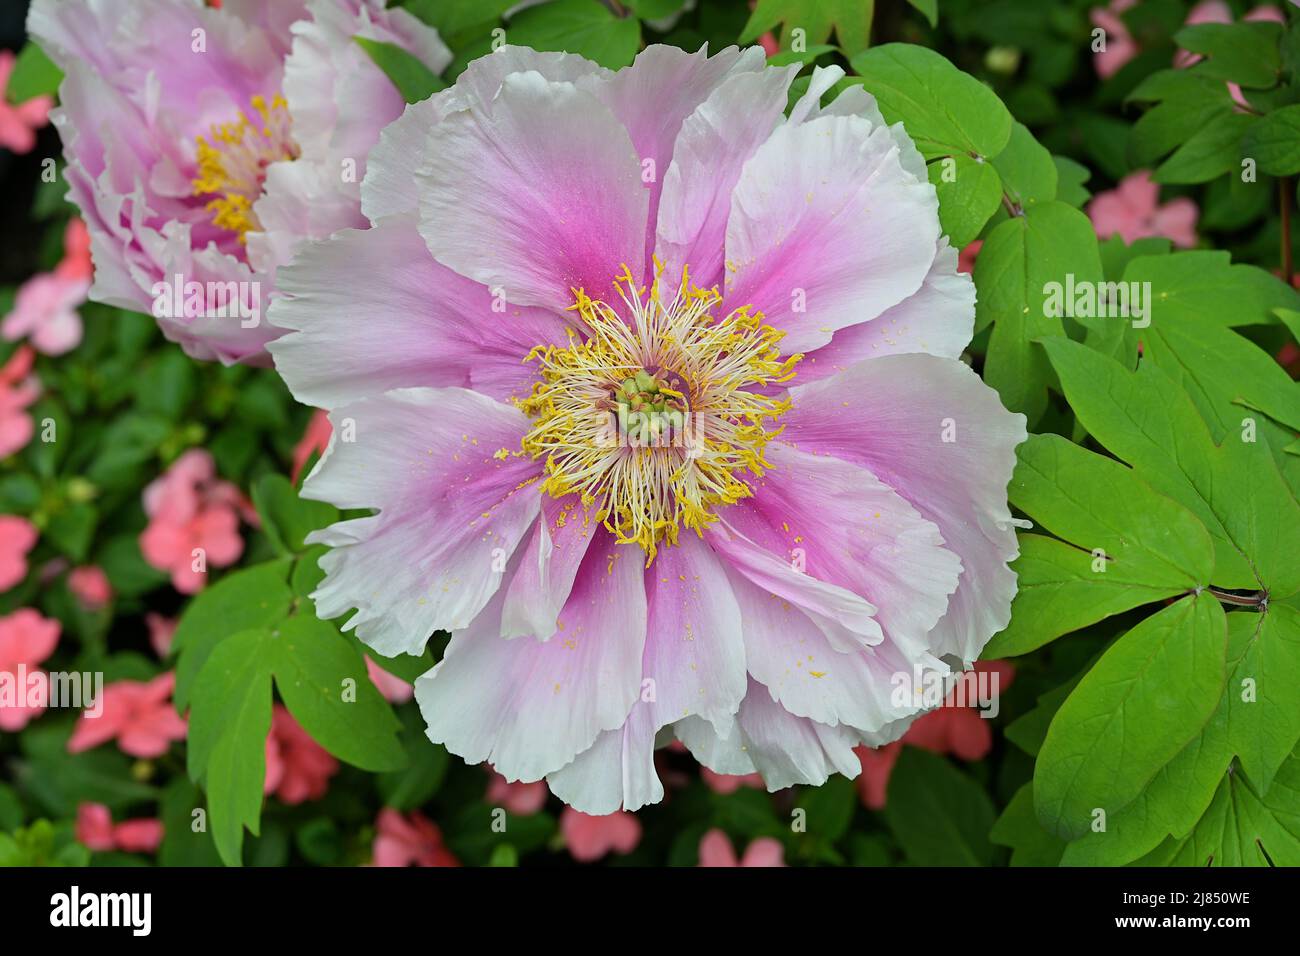 The peony or paeony is a flowering plant native to Asia, Europe and Western North America. With 33 known species, most are herbaceous perennials with Stock Photo